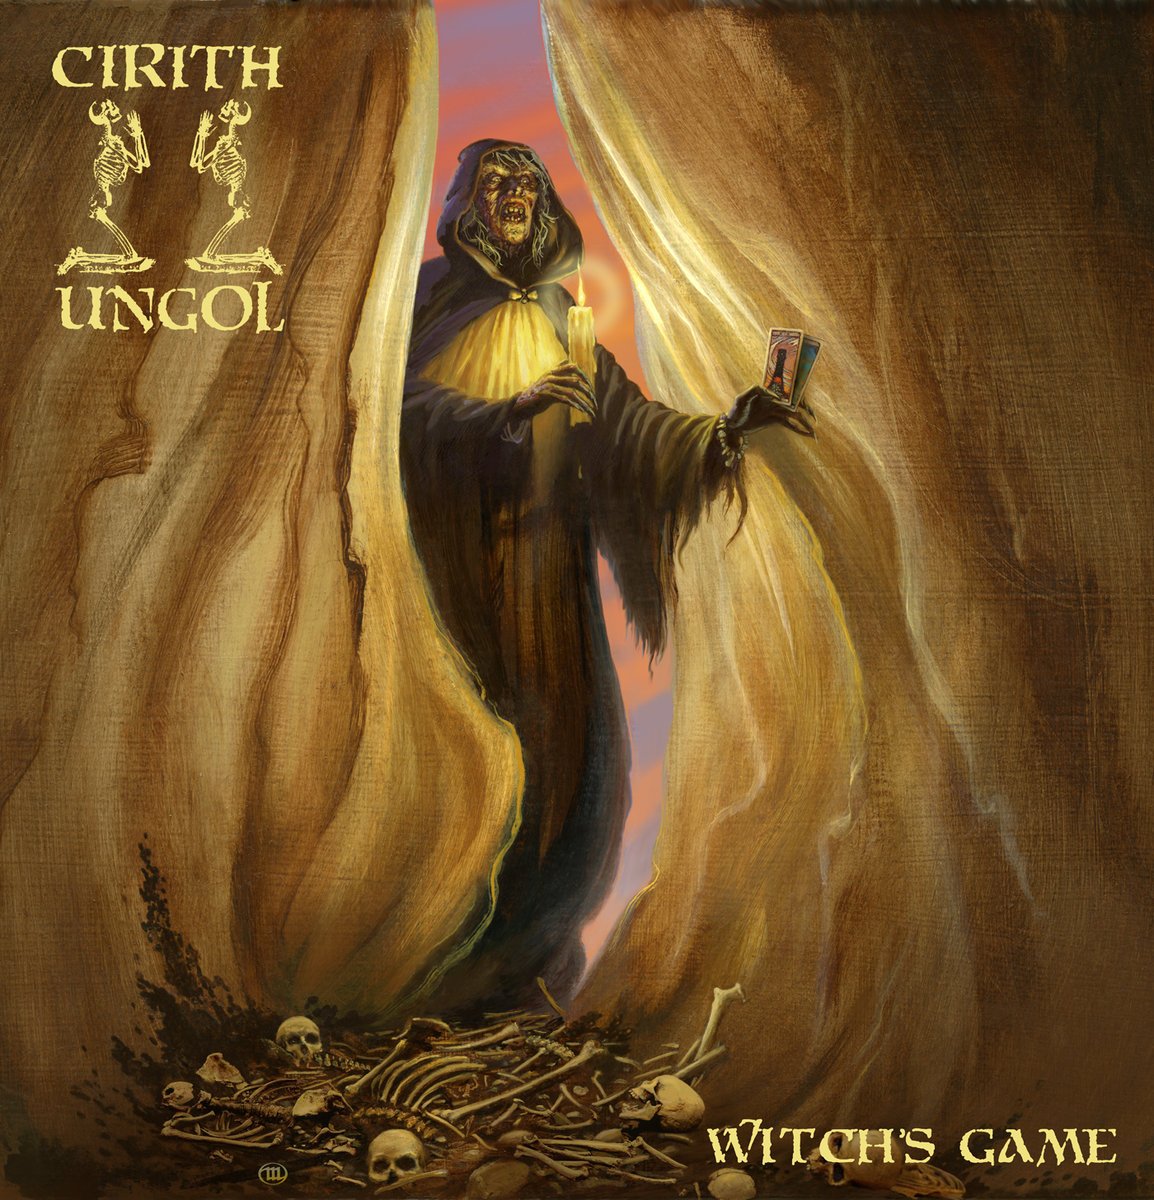 witchsgame front Cirith Ungol - Witch's Game VINYL EP NEW (5TH OCT) | Cirith Ungol Online